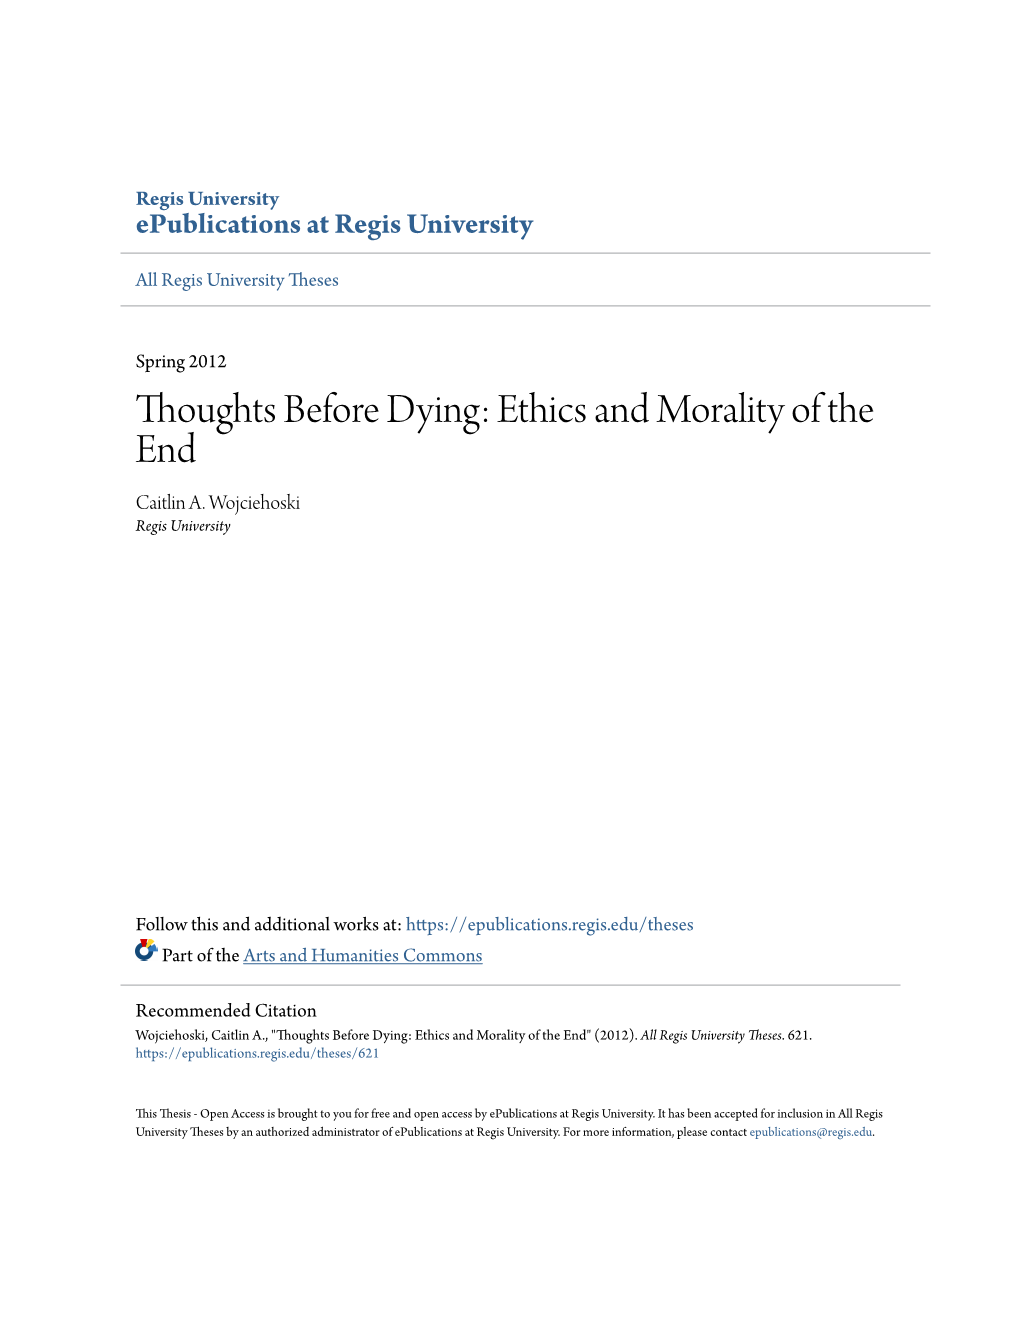 Thoughts Before Dying: Ethics and Morality of the End Caitlin A